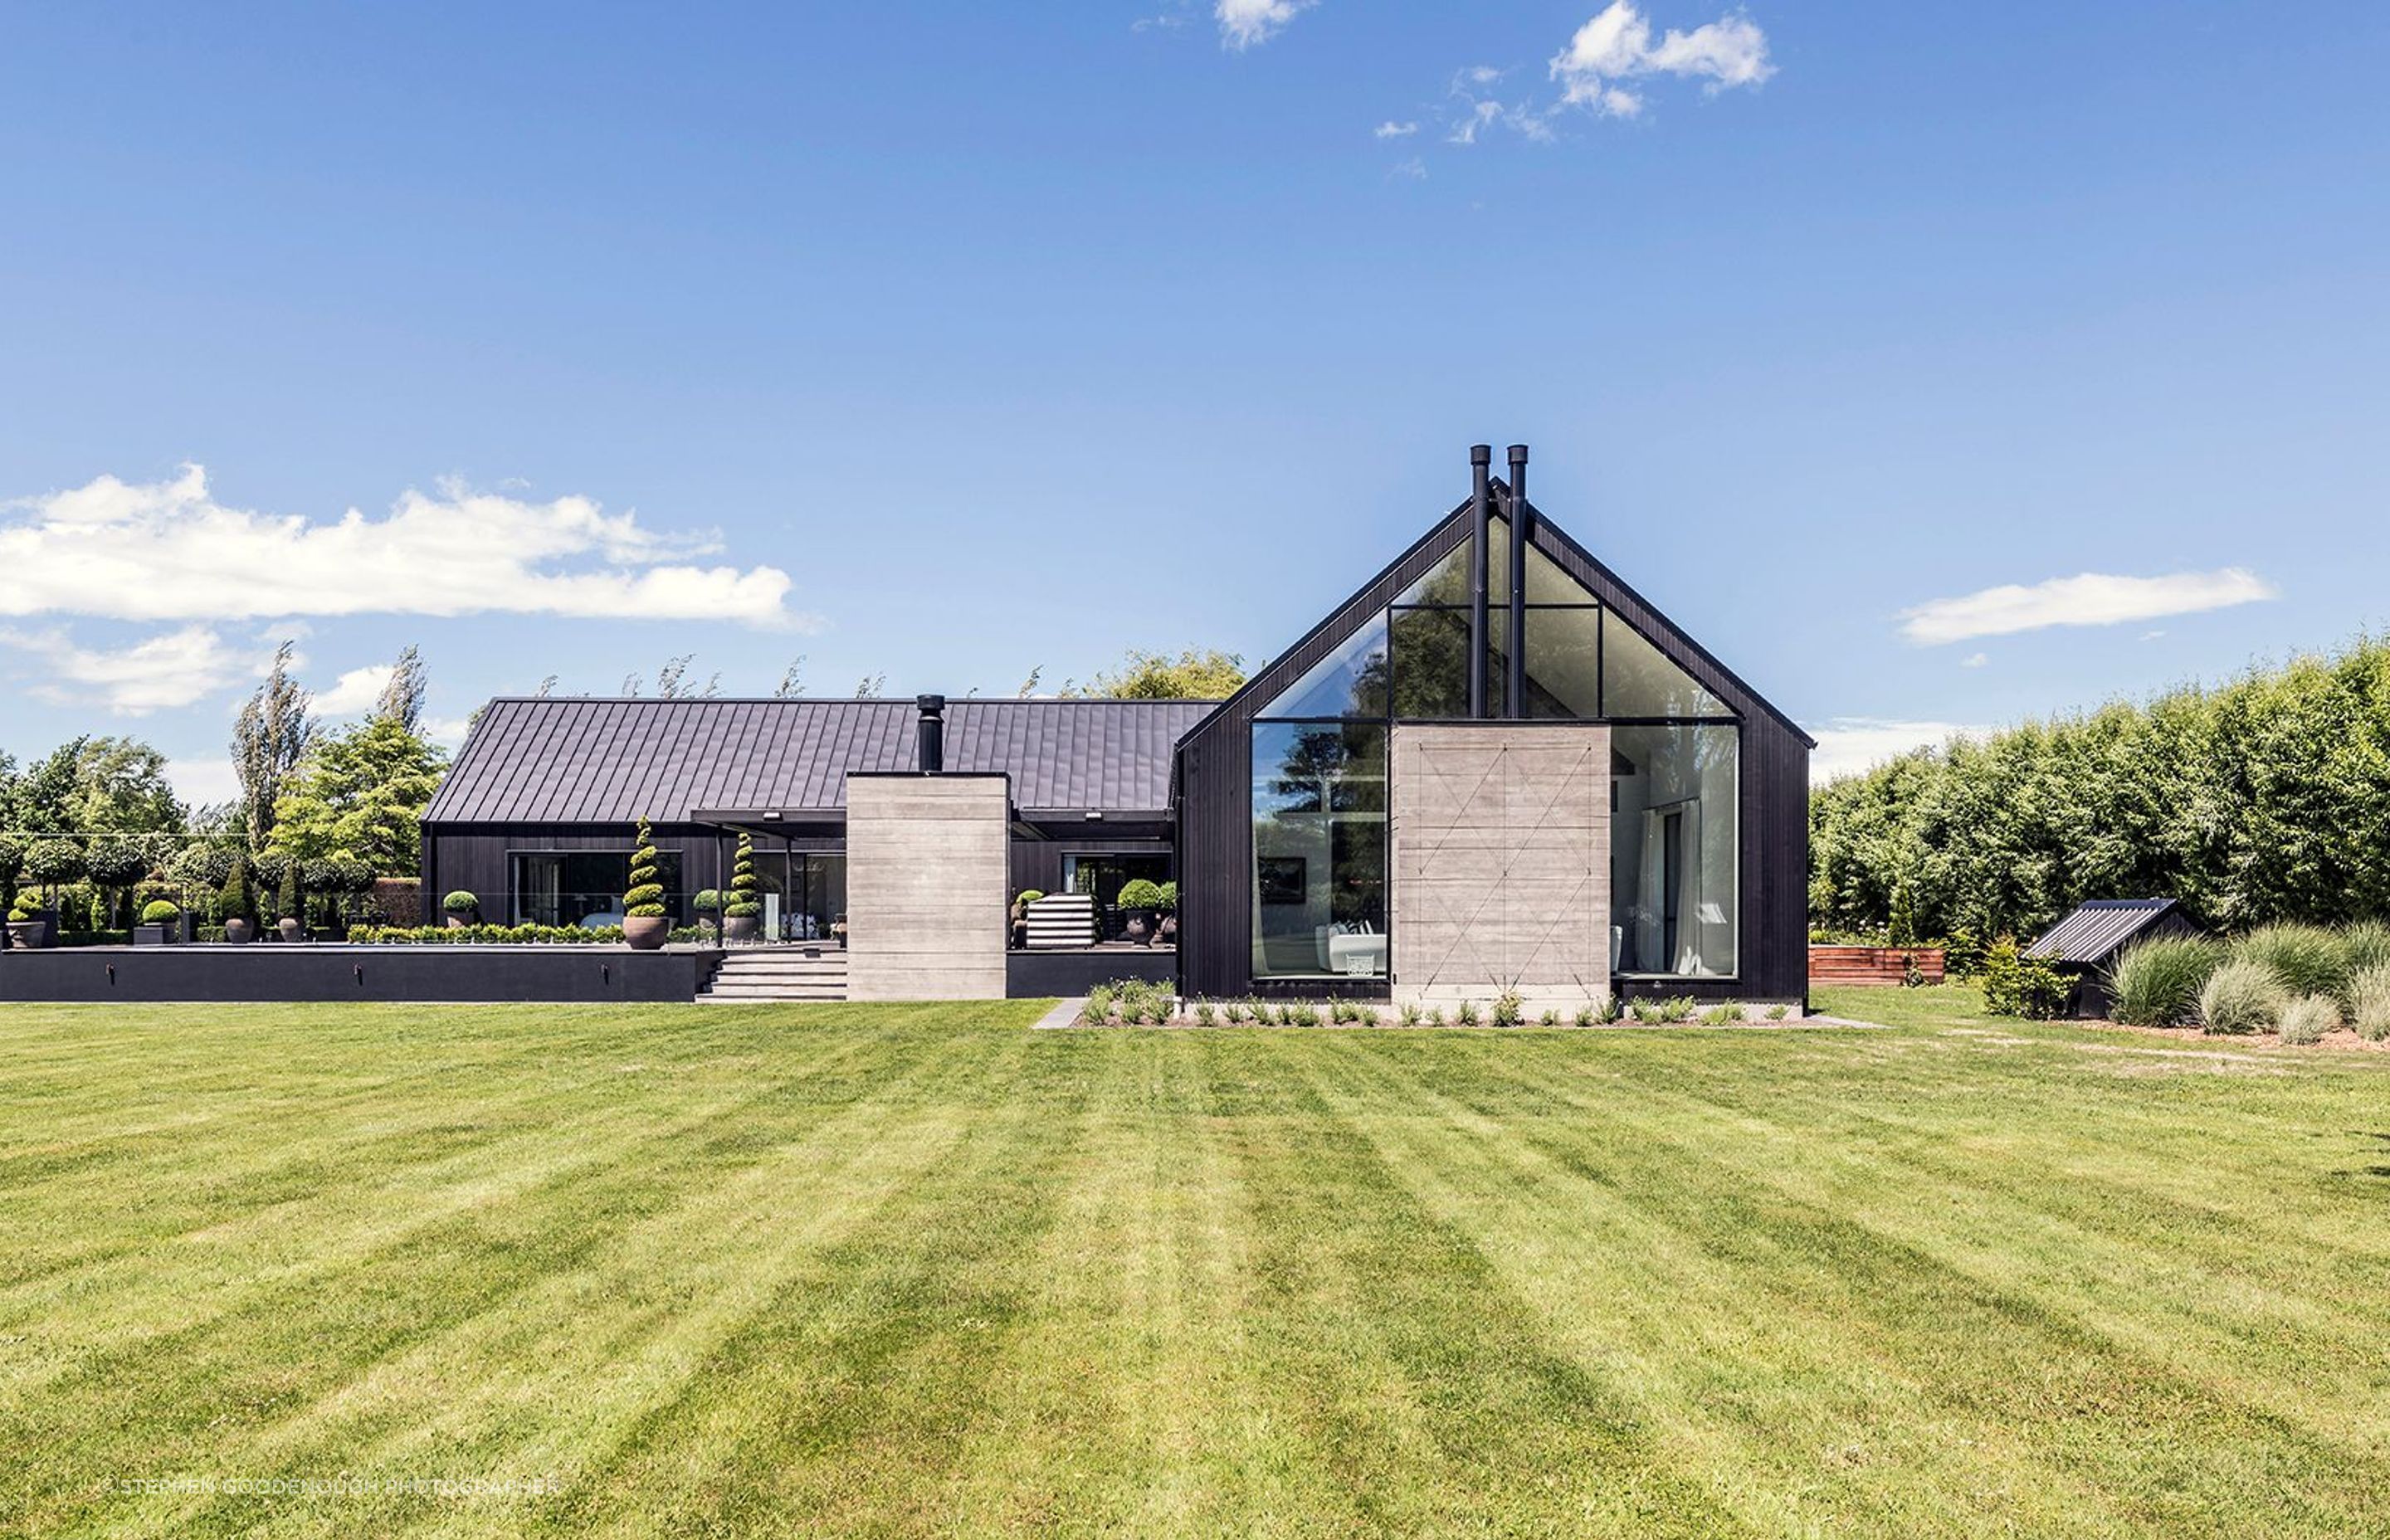 This striking home sits on a lifestyle block on the outskirts of Christchurch.